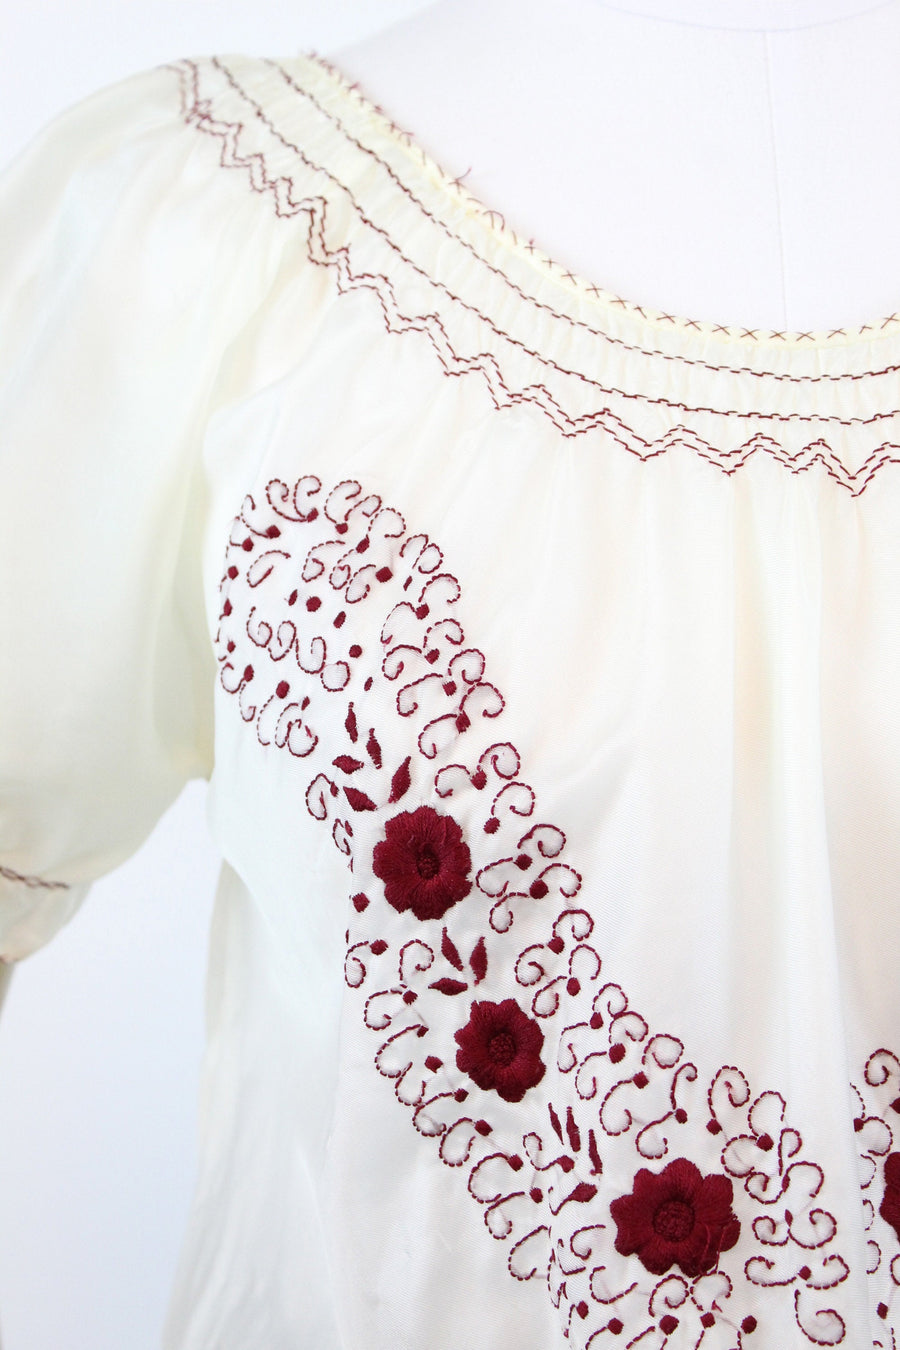 1940s rayon embroidered hungarian blouse small medium | vintage top | new in